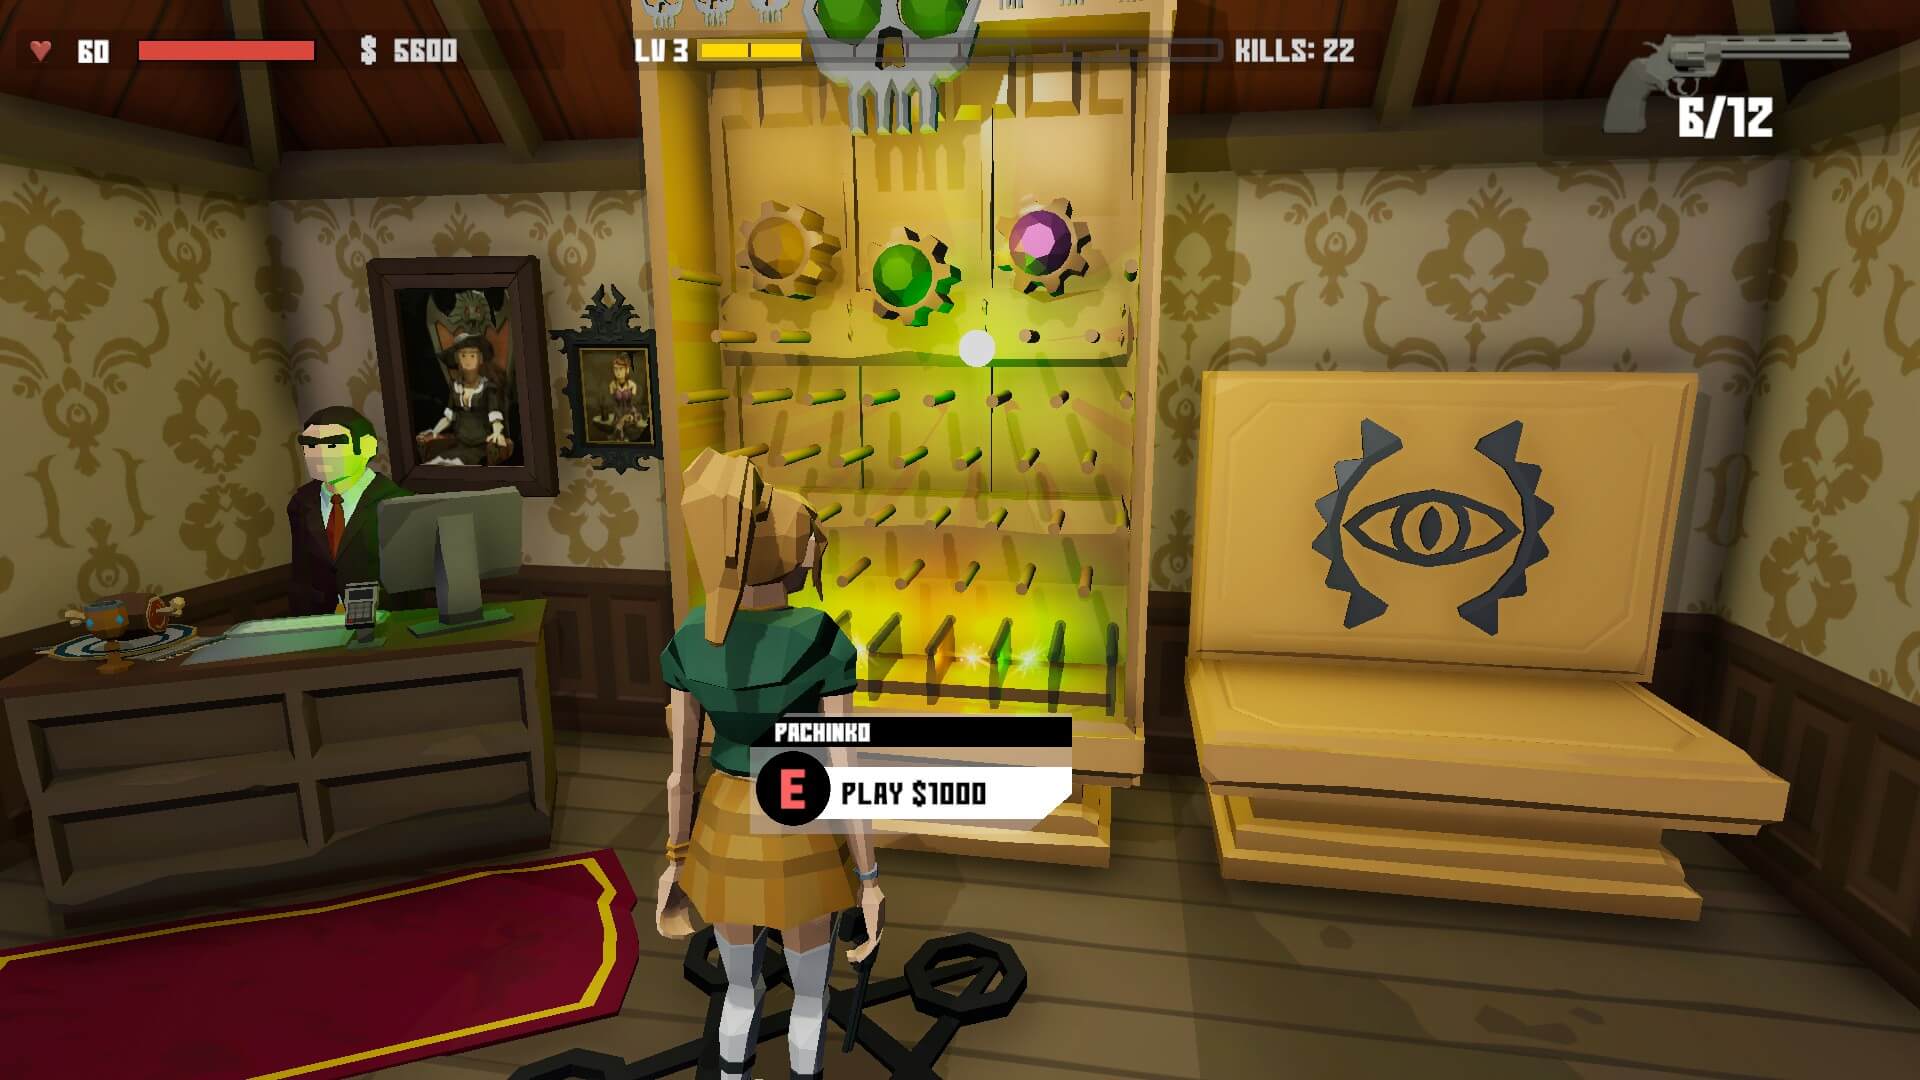 The shop in the game. the large machine is a pachinko game that drops a ball that goes into one of the coloured slots at the bottom.